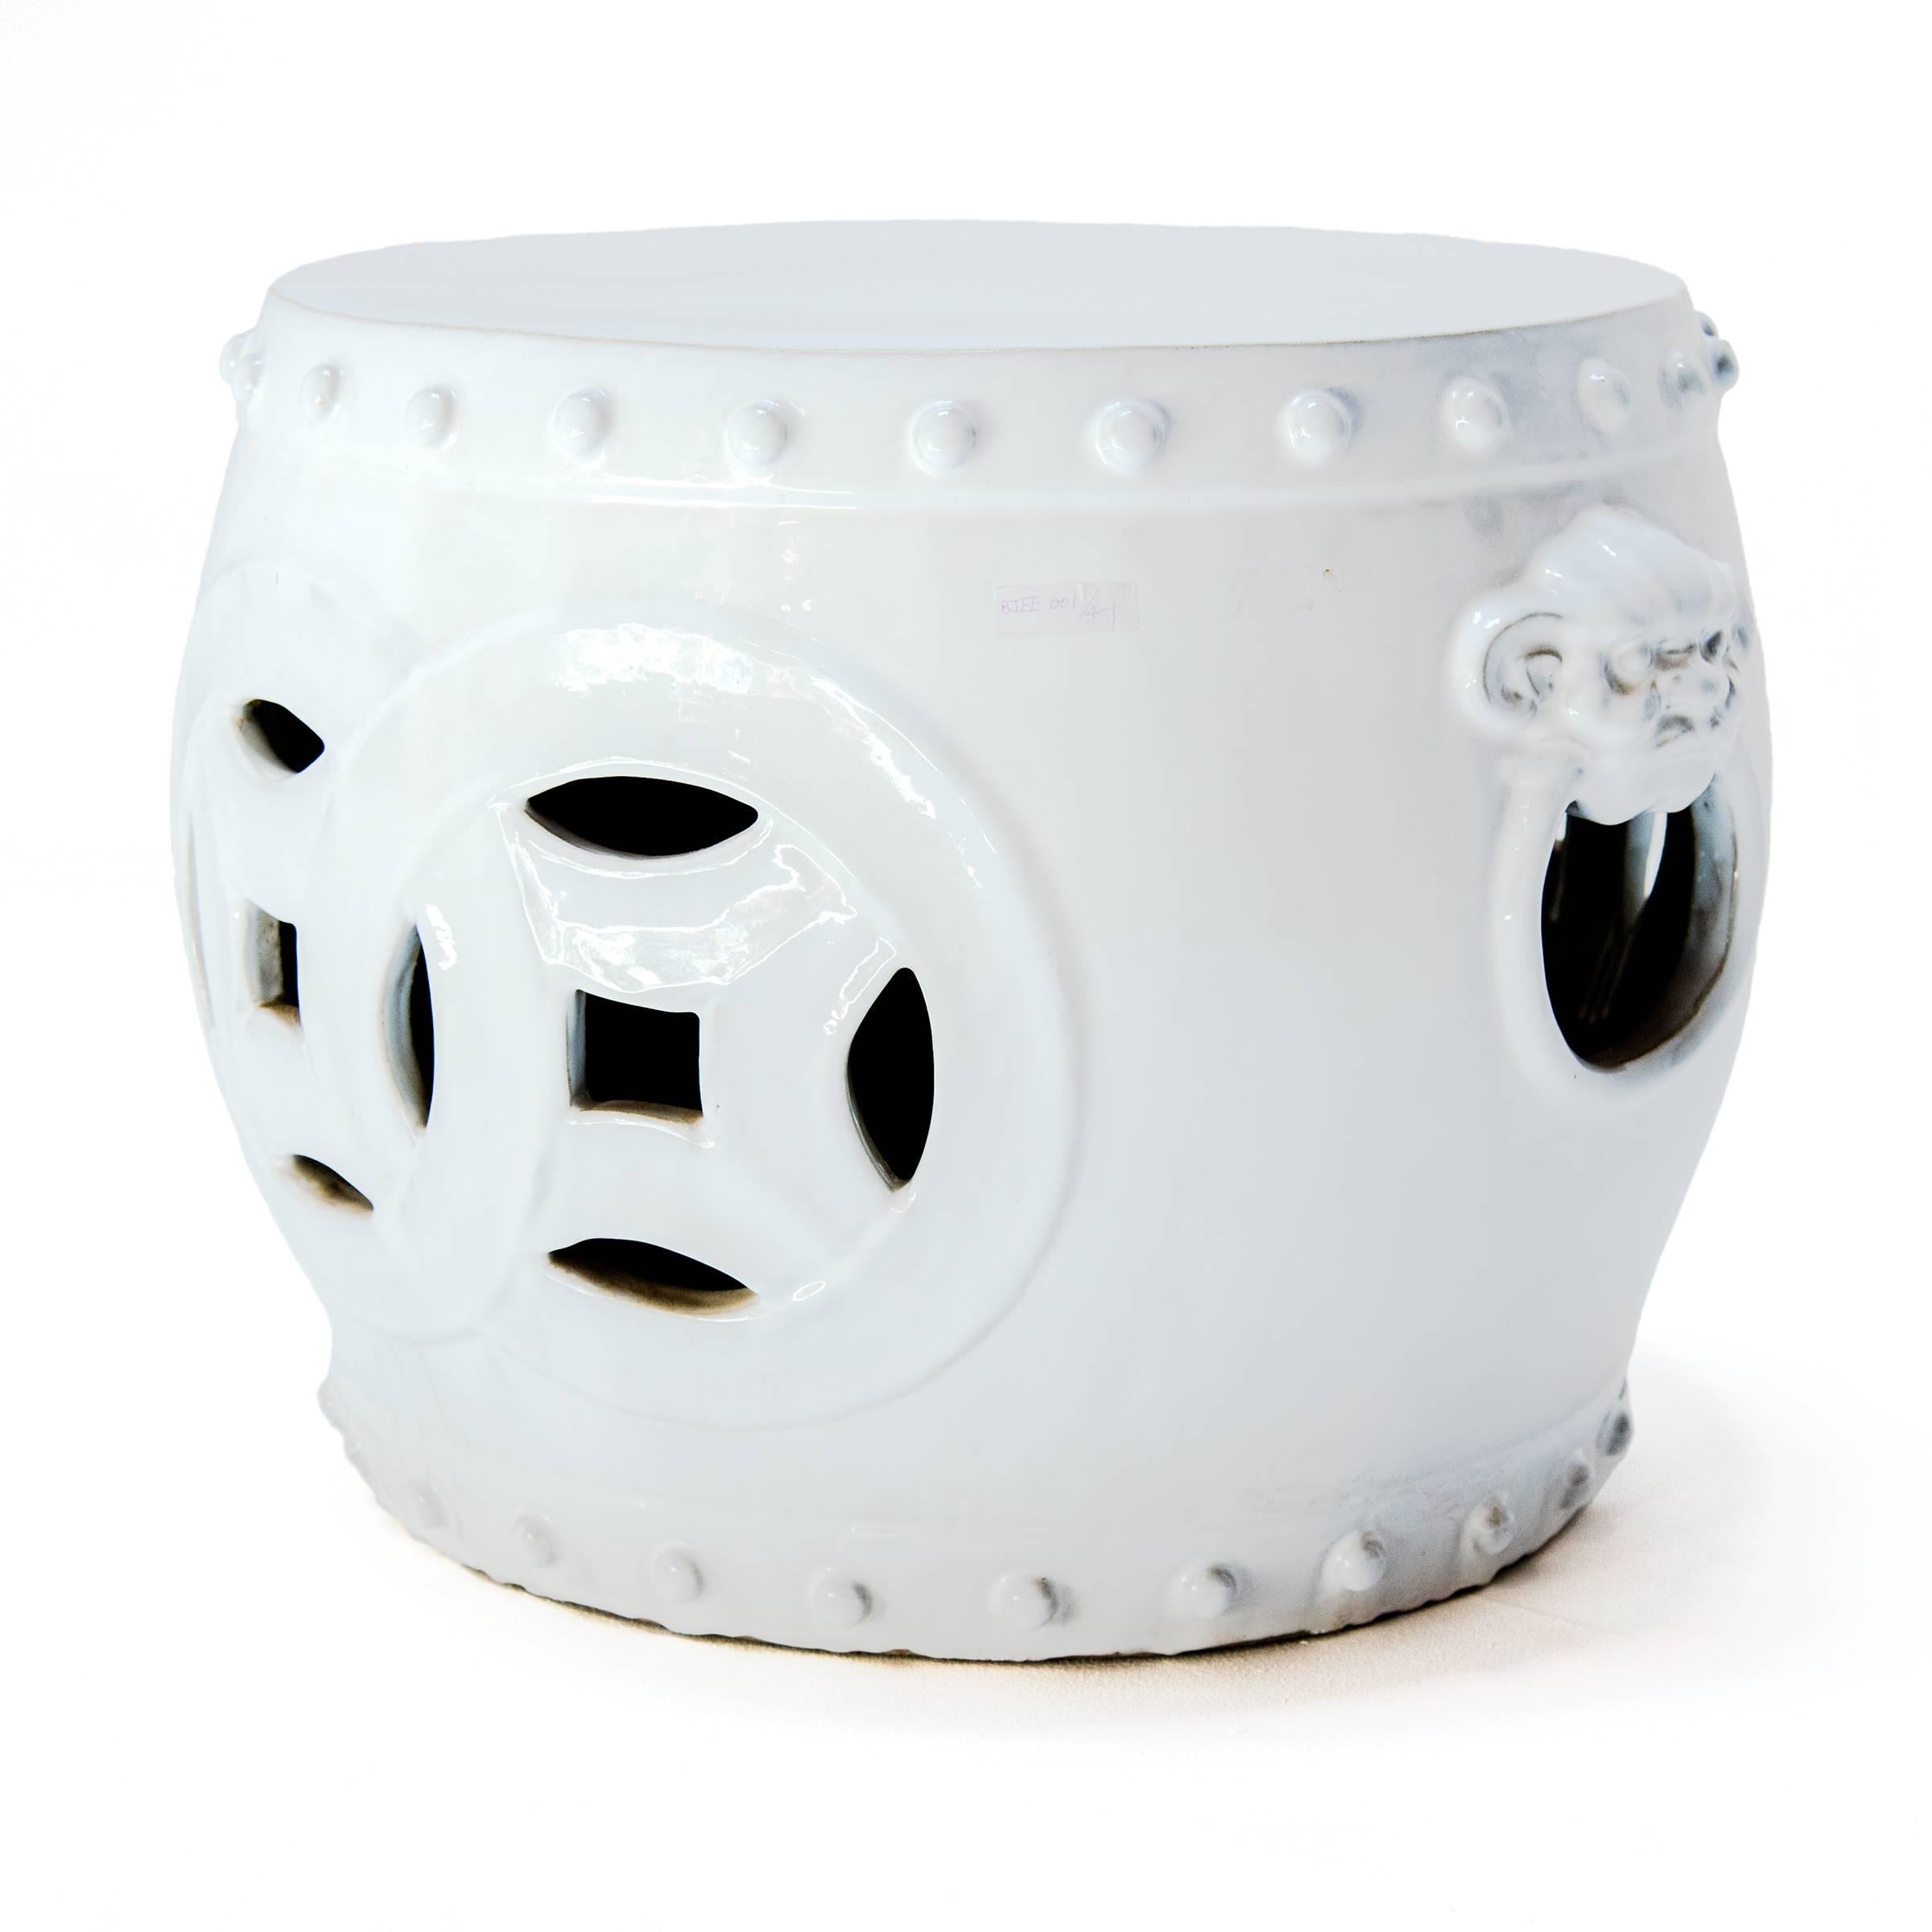 This unusually proportioned ceramic table from China’s Jiangxi province is a modern interpretation of the classic drum-form garden stool. Cloaked in a pristine, monochrome white glaze, the wide stool is decorated with bands of imitation nails, fu